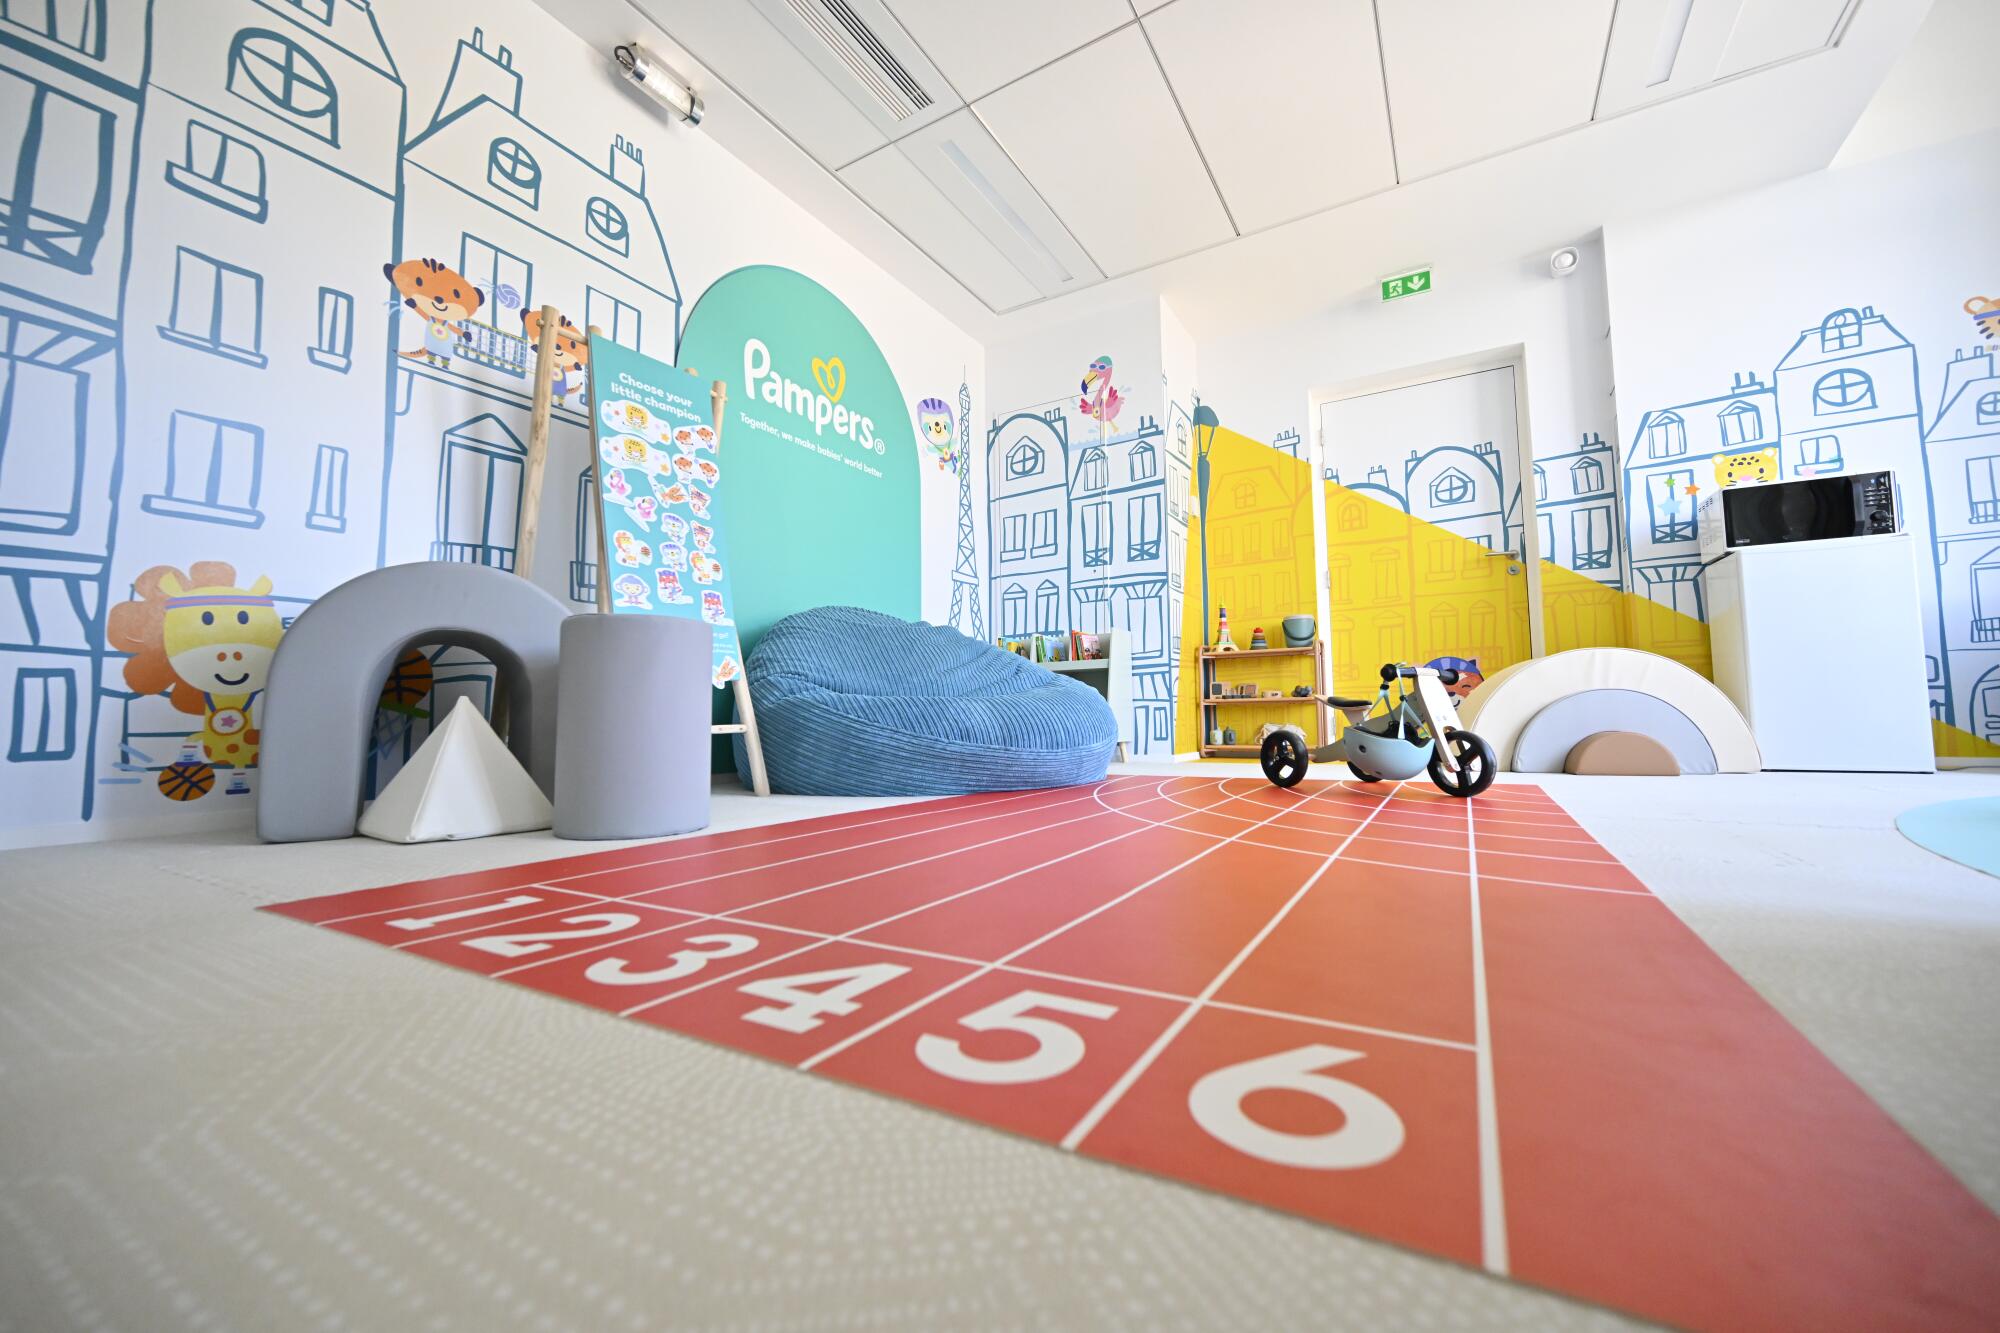 The nursery in Paris available to the 23,000 athletes and team personnel at the Olympic Games.